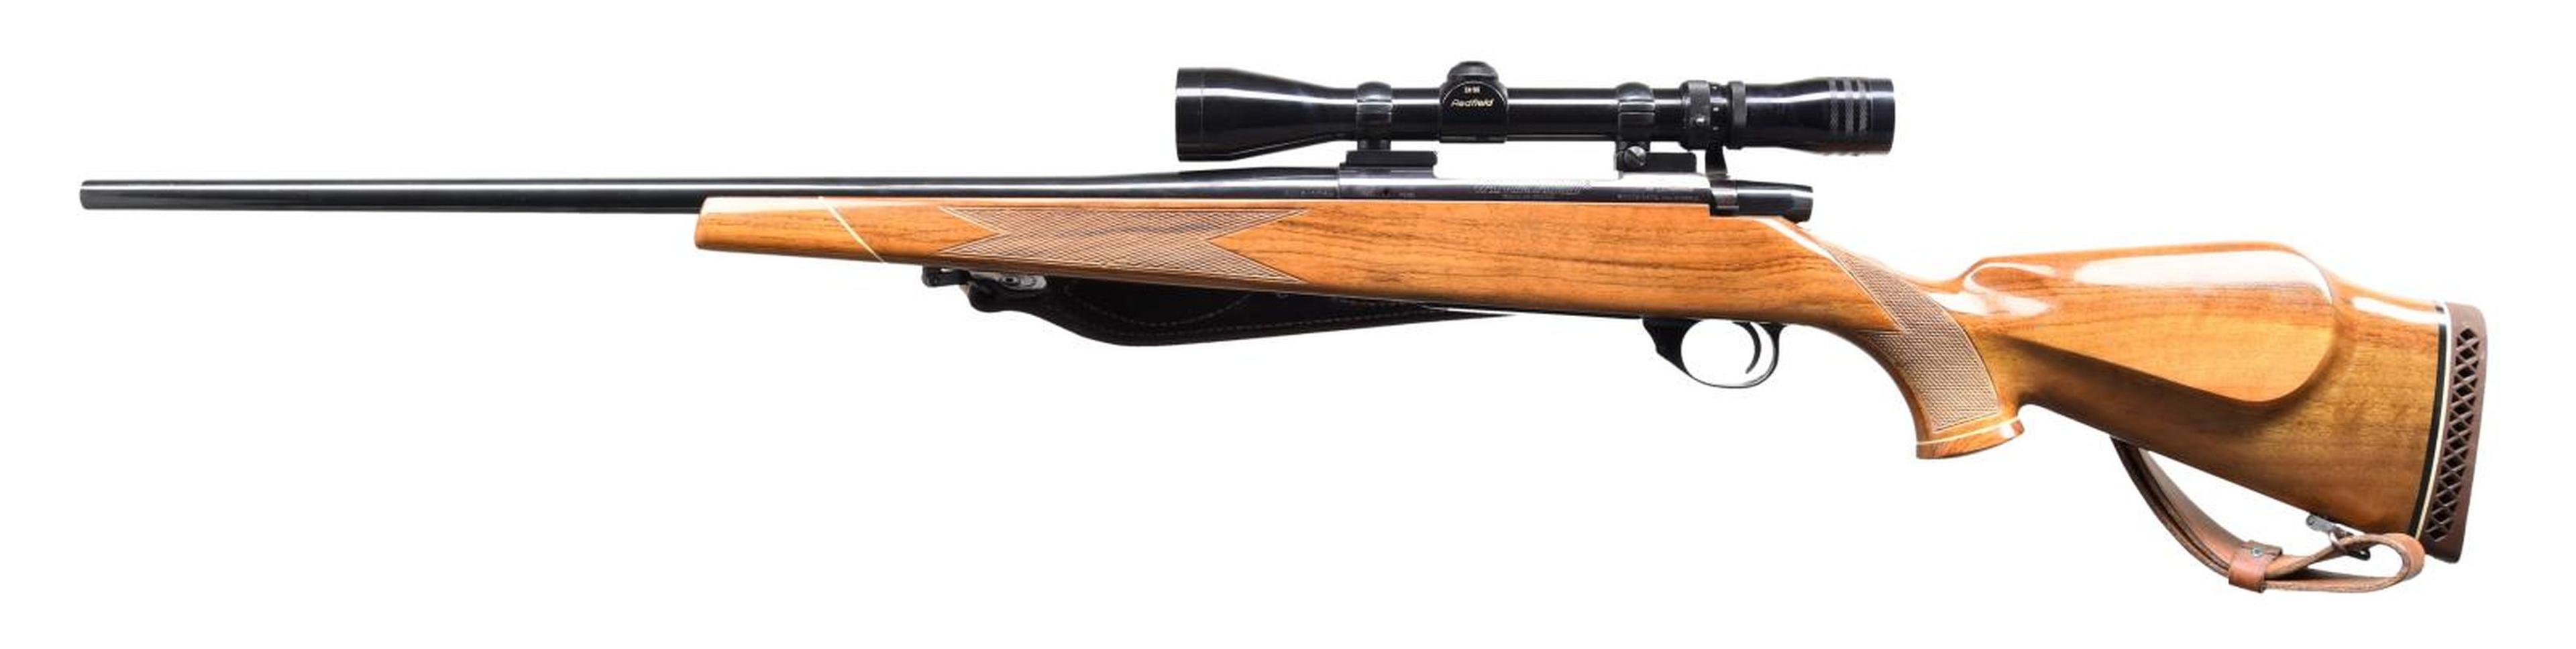 WEATHERBY VANGUARD BOLT ACTION RIFLE.